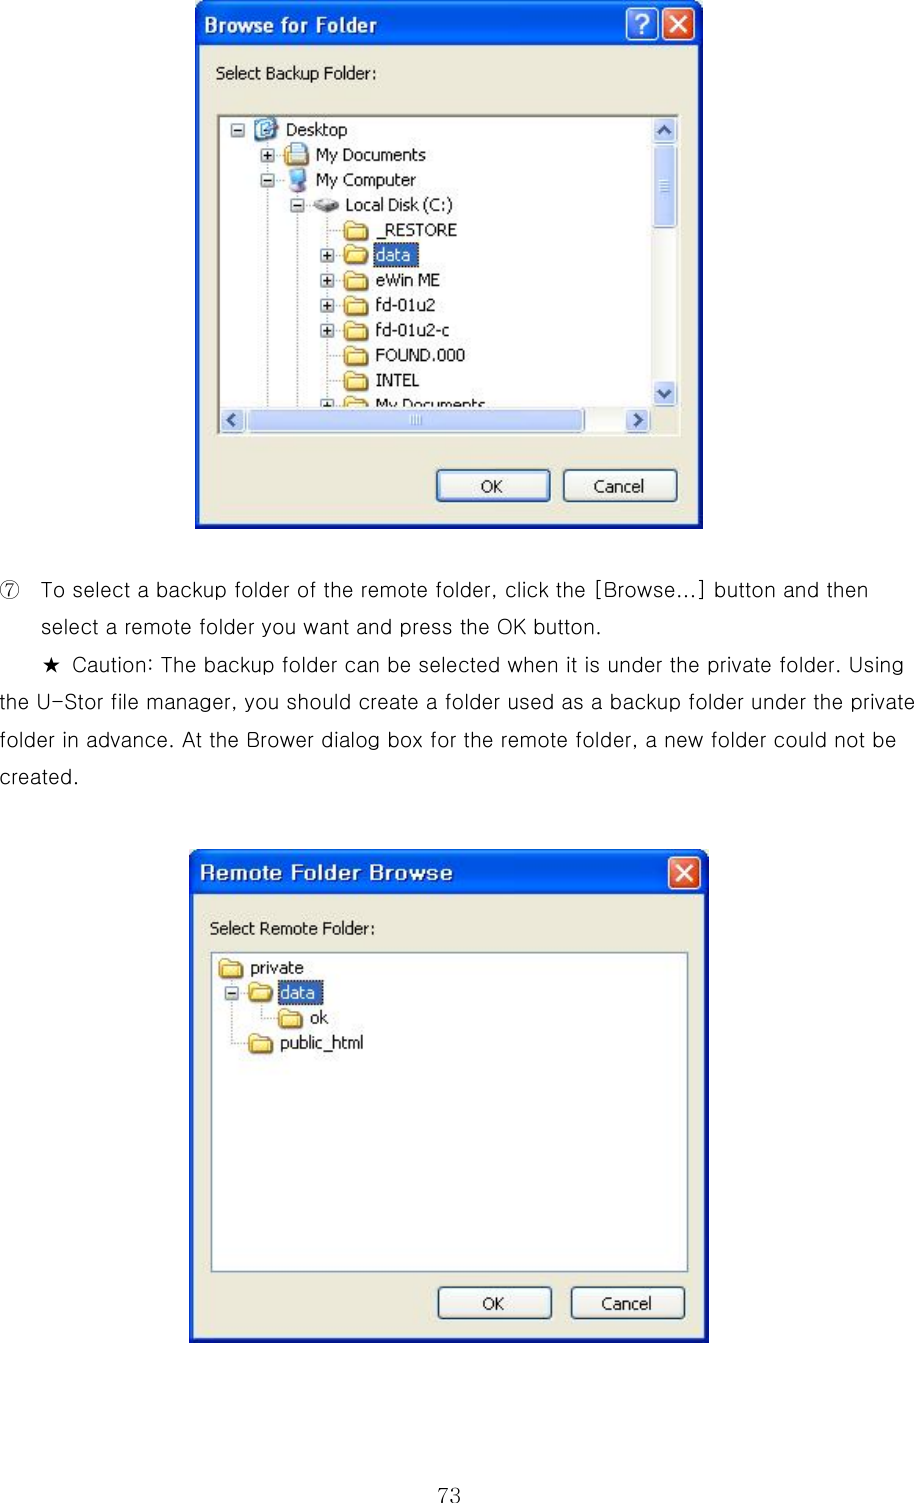  73 ⑦  To select a backup folder of the remote folder, click the [Browse...] button and then select a remote folder you want and press the OK button.   ★ Caution: The backup folder can be selected when it is under the private folder. Using the U-Stor file manager, you should create a folder used as a backup folder under the private folder in advance. At the Brower dialog box for the remote folder, a new folder could not be created.   